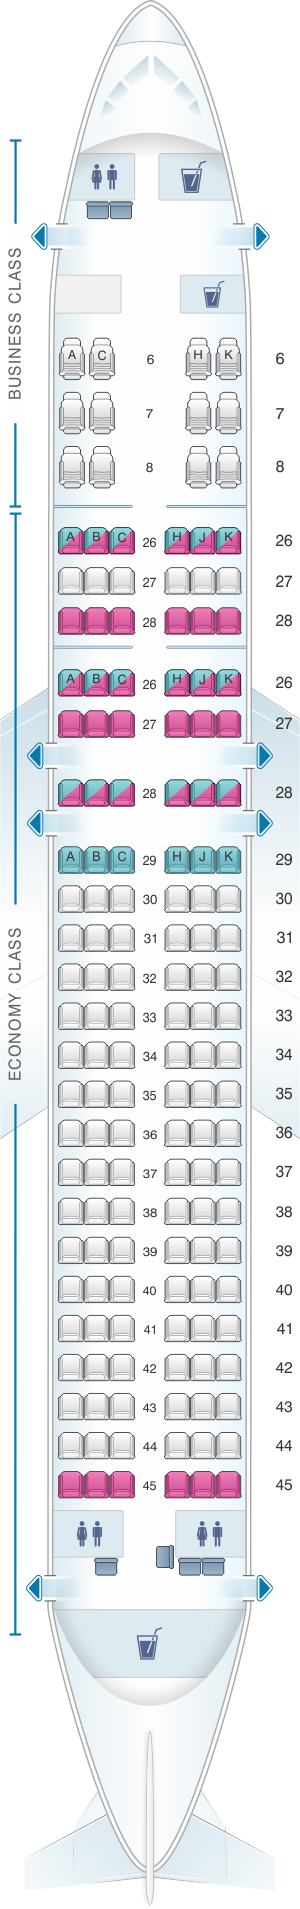 Seat Map Royal Brunei Airlines Airbus A320 New | SeatMaestro